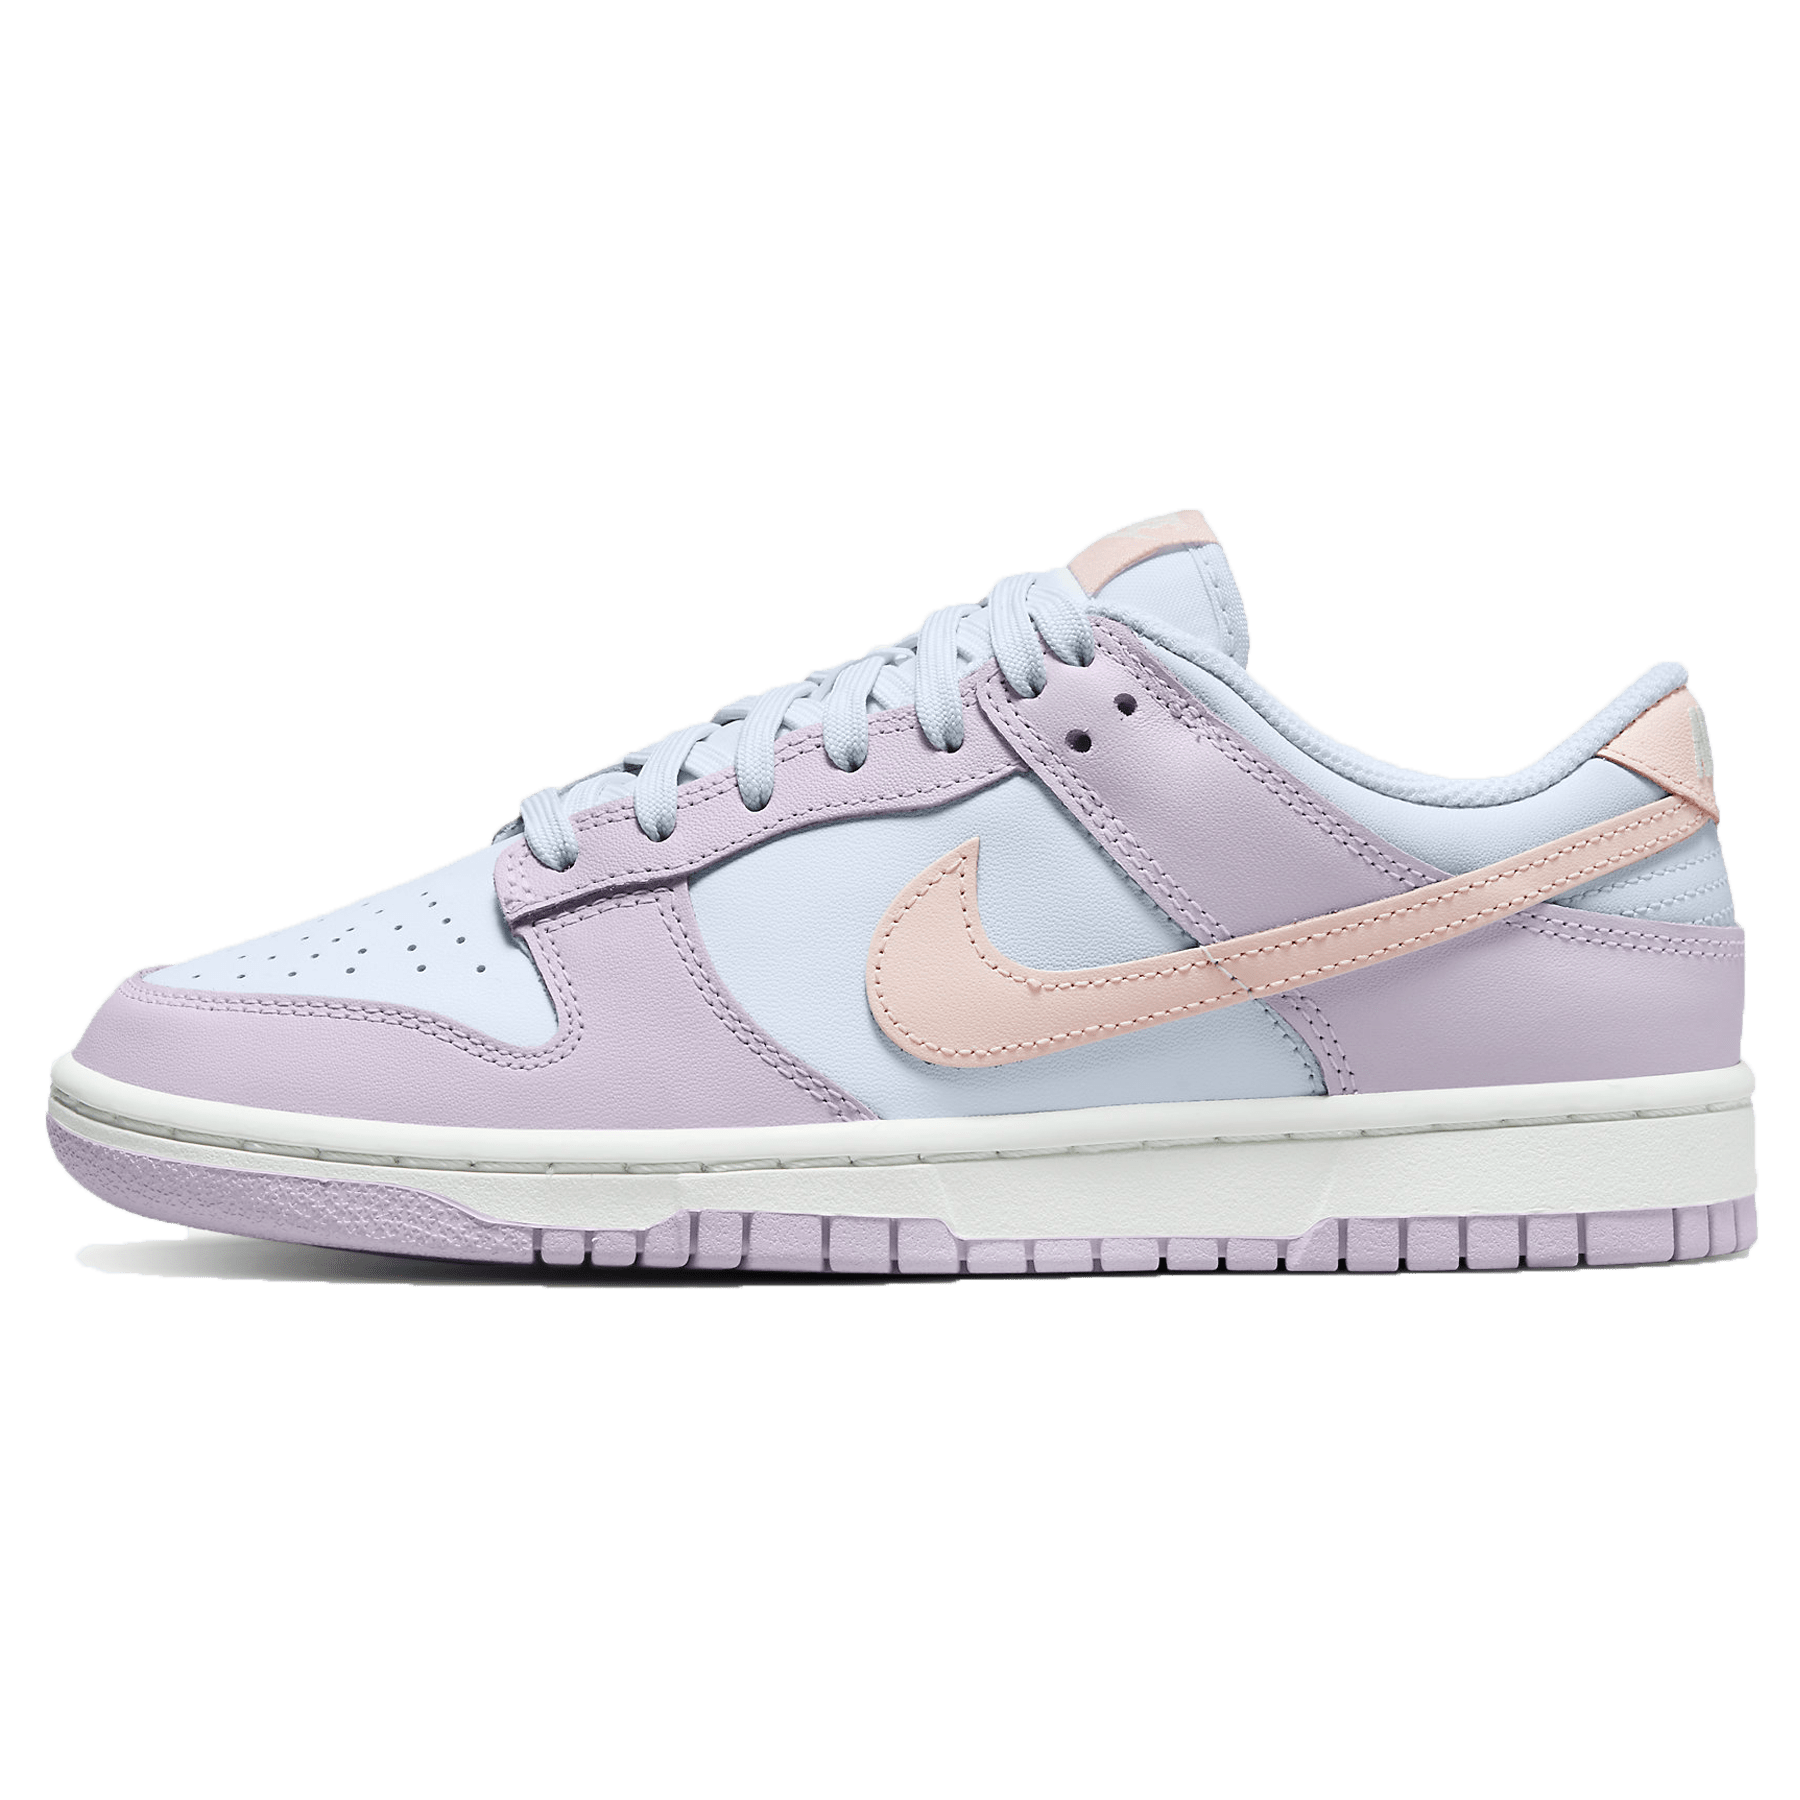 Nike Dunk Low Wmns Easter DD1503 001